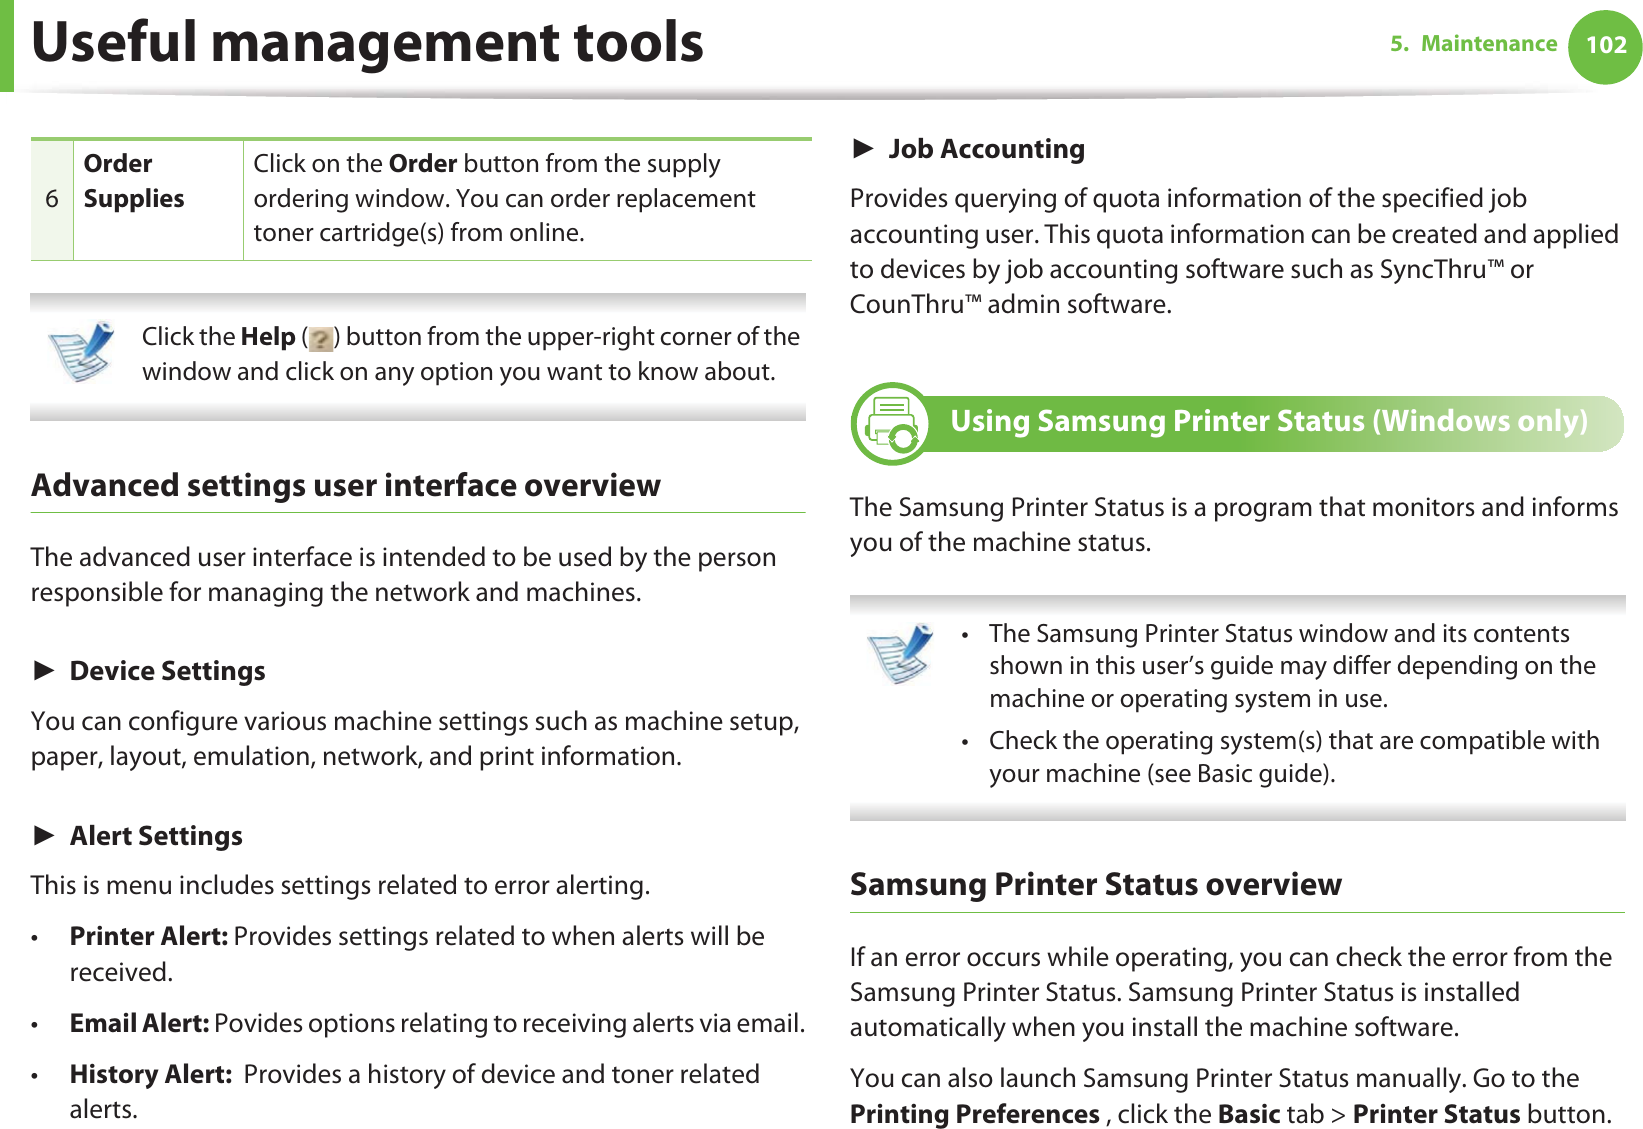 Useful management tools 1025. Maintenance Click the Help ( ) button from the upper-right corner of the window and click on any option you want to know about.  Advanced settings user interface overviewThe advanced user interface is intended to be used by the person responsible for managing the network and machines.ŹDevice SettingsYou can configure various machine settings such as machine setup, paper, layout, emulation, network, and print information.ŹAlert SettingsThis is menu includes settings related to error alerting. •Printer Alert: Provides settings related to when alerts will be received.•Email Alert: Povides options relating to receiving alerts via email.•History Alert:  Provides a history of device and toner related alerts.ŹJob AccountingProvides querying of quota information of the specified job accounting user. This quota information can be created and applied to devices by job accounting software such as SyncThru™ or CounThru™ admin software.8 Using Samsung Printer Status (Windows only)The Samsung Printer Status is a program that monitors and informs you of the machine status.  • The Samsung Printer Status window and its contents shown in this user’s guide may differ depending on the machine or operating system in use.• Check the operating system(s) that are compatible with your machine (see Basic guide). Samsung Printer Status overviewIf an error occurs while operating, you can check the error from the Samsung Printer Status. Samsung Printer Status is installed automatically when you install the machine software. You can also launch Samsung Printer Status manually. Go to the Printing Preferences , click the Basic tab &gt; Printer Status button.6Order SuppliesClick on the Order button from the supply ordering window. You can order replacement toner cartridge(s) from online.